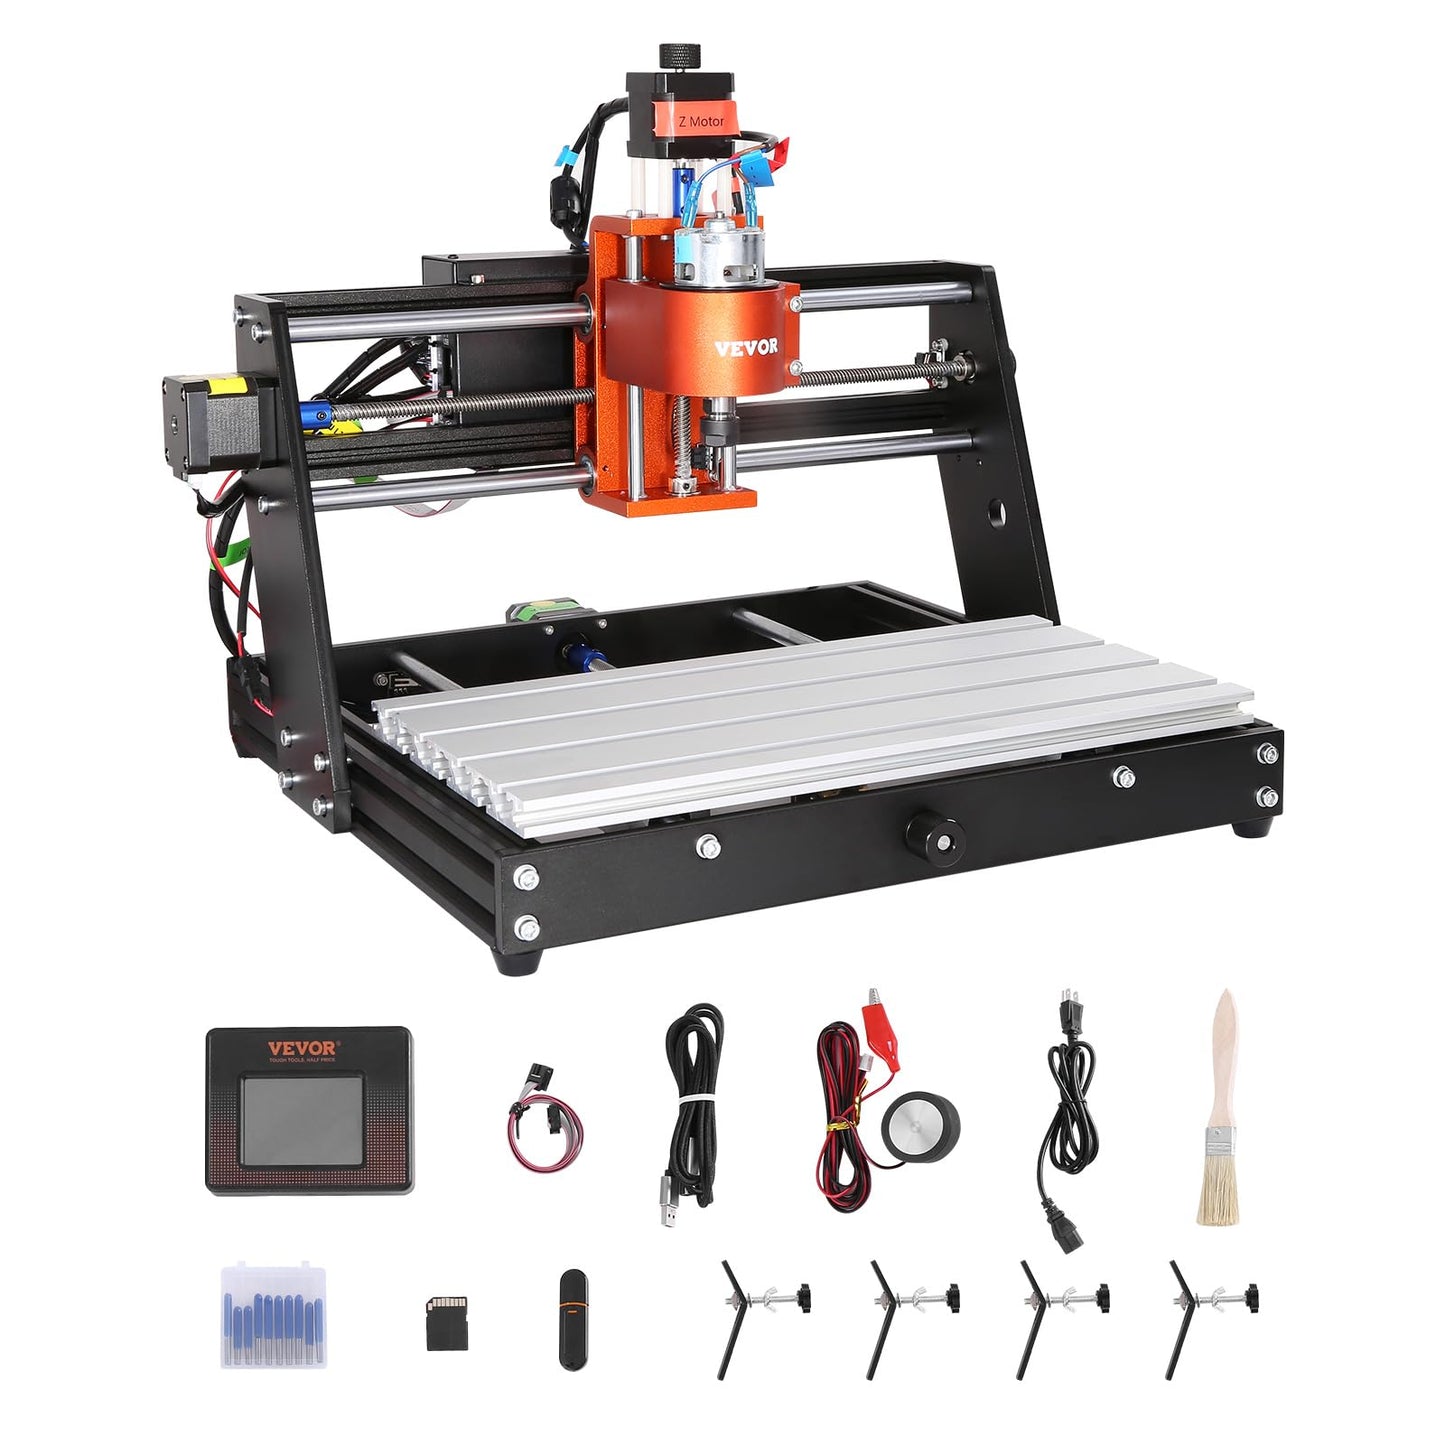 VEVOR CNC Router Machine, 120W 3 Axis GRBL Control Wood Engraving Carving Milling Machine Kit, 300 x 200 x 60 mm/11.8 x 7.87 x 2.36 in Working Area